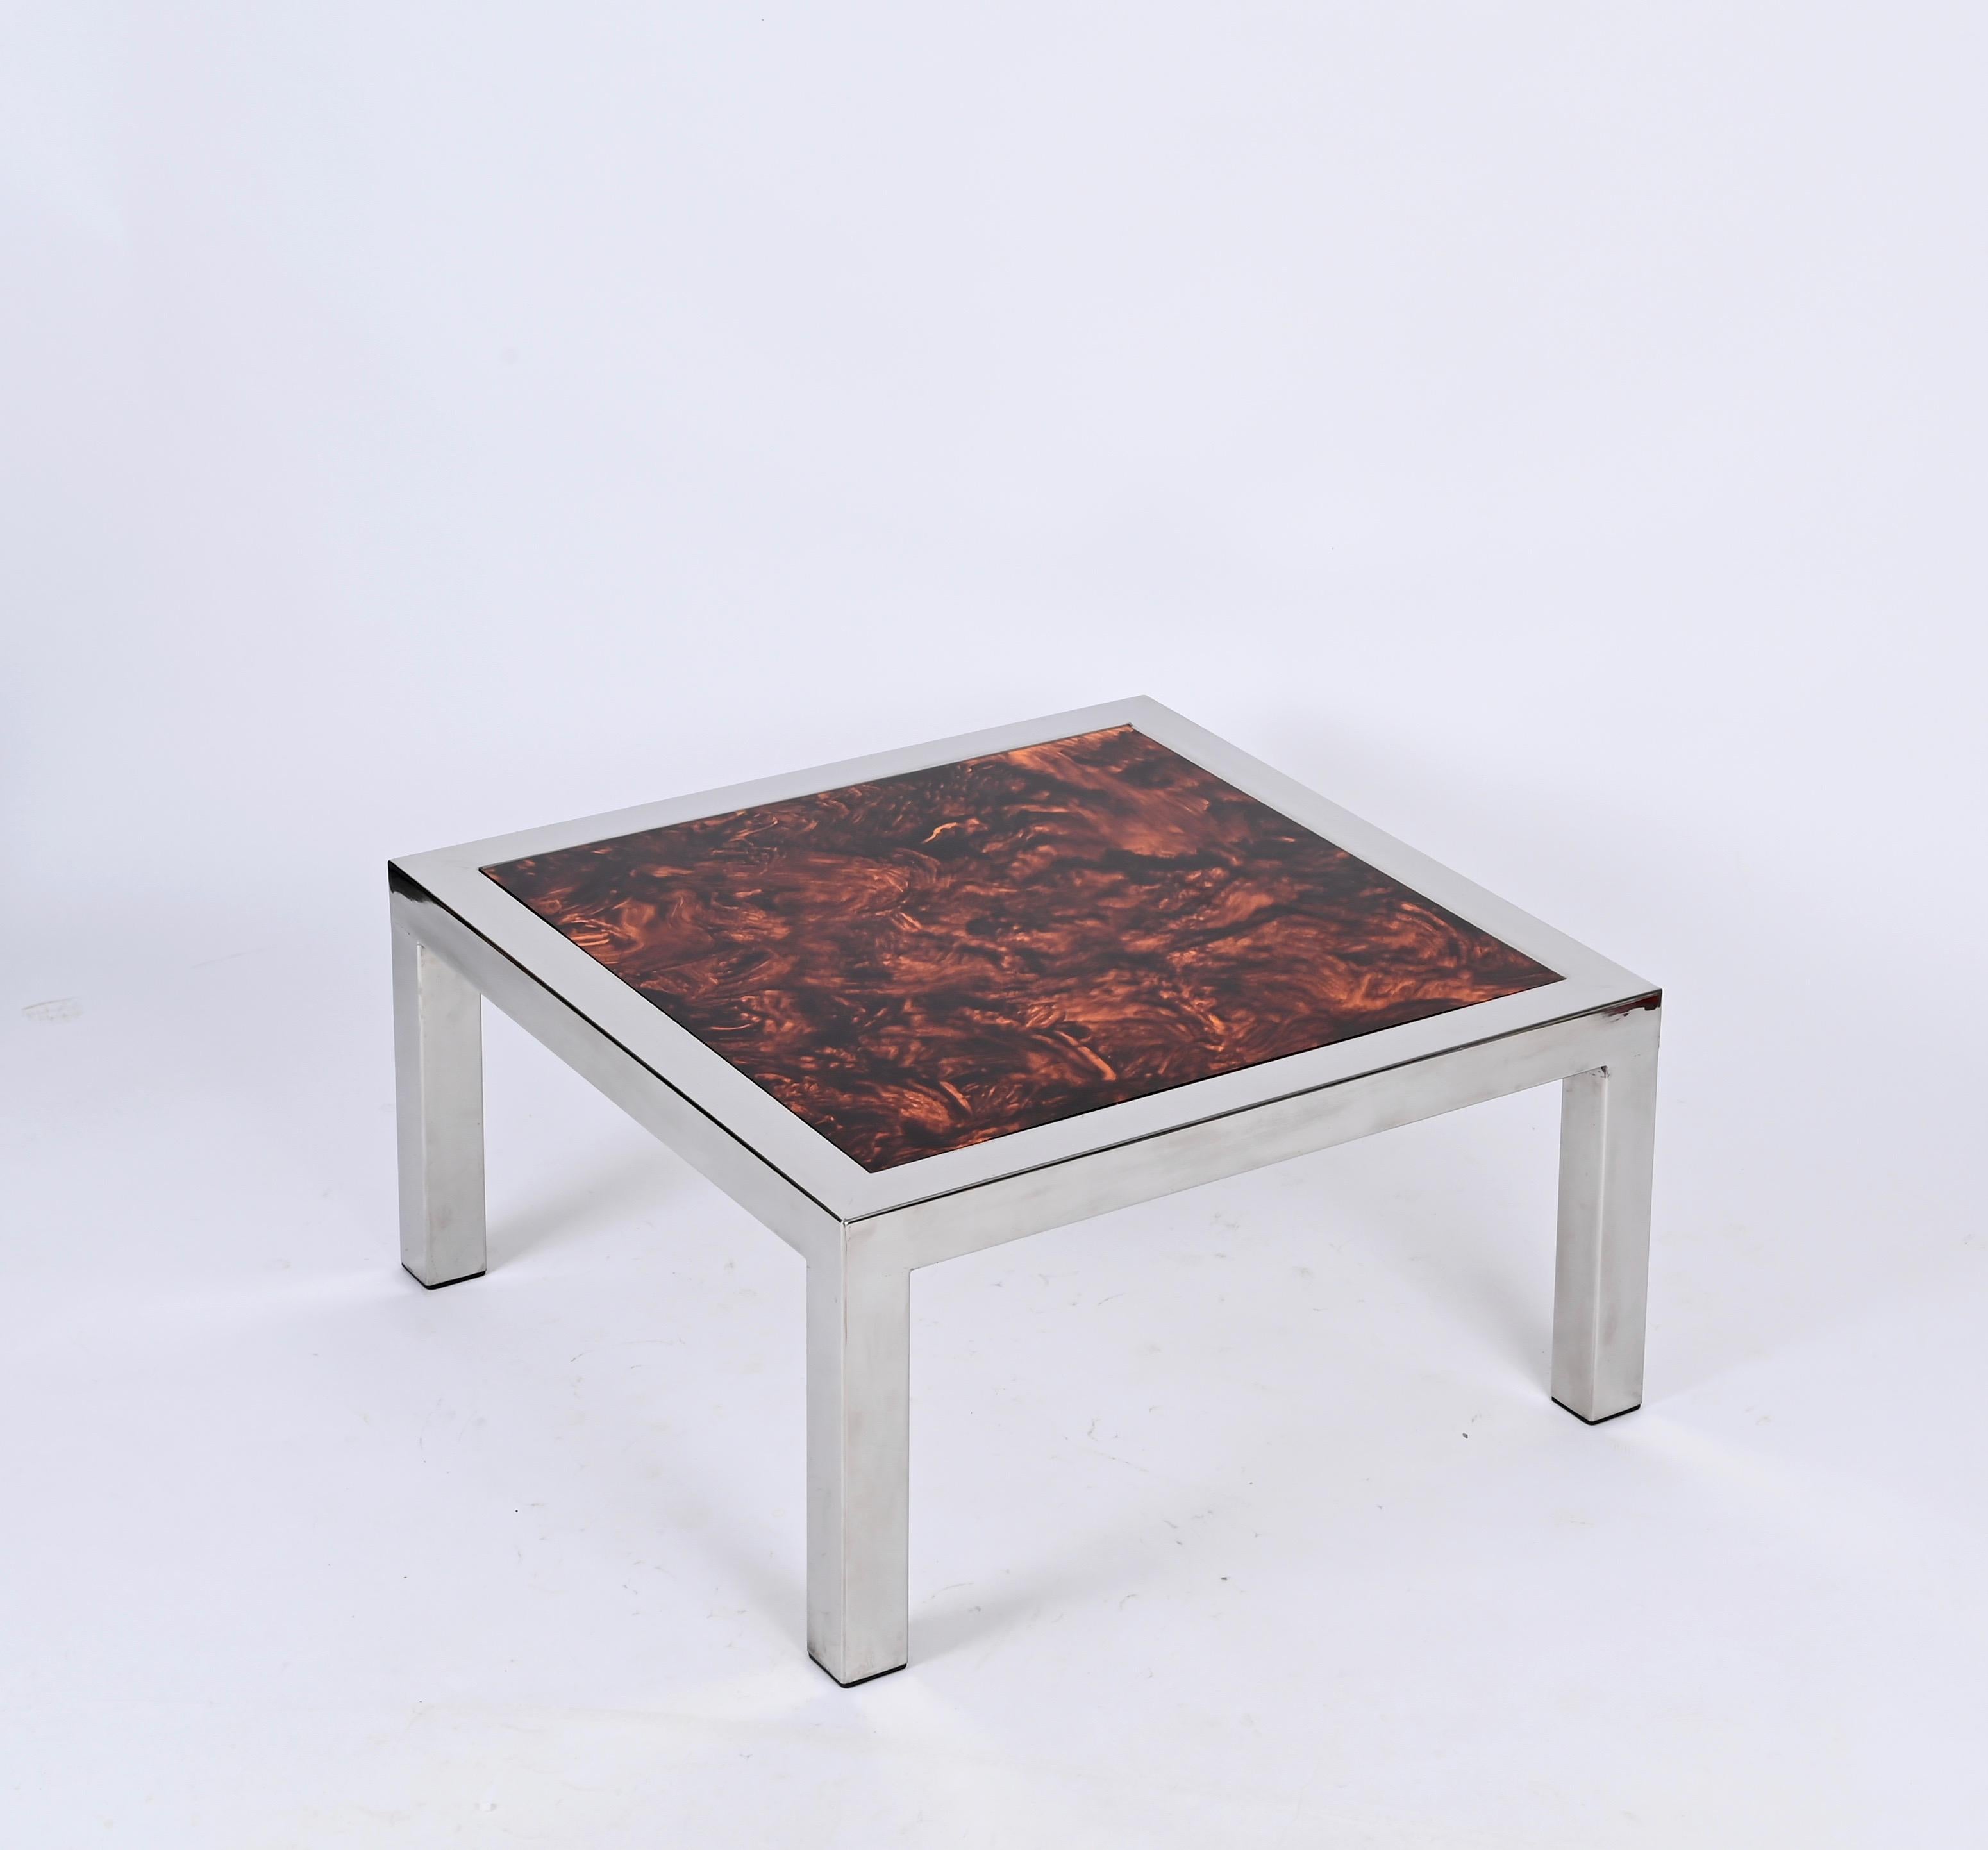 Late 20th Century Chromed Steel and Tortoiseshell Effect Lucite Square Coffee Table, Italy 1970s For Sale